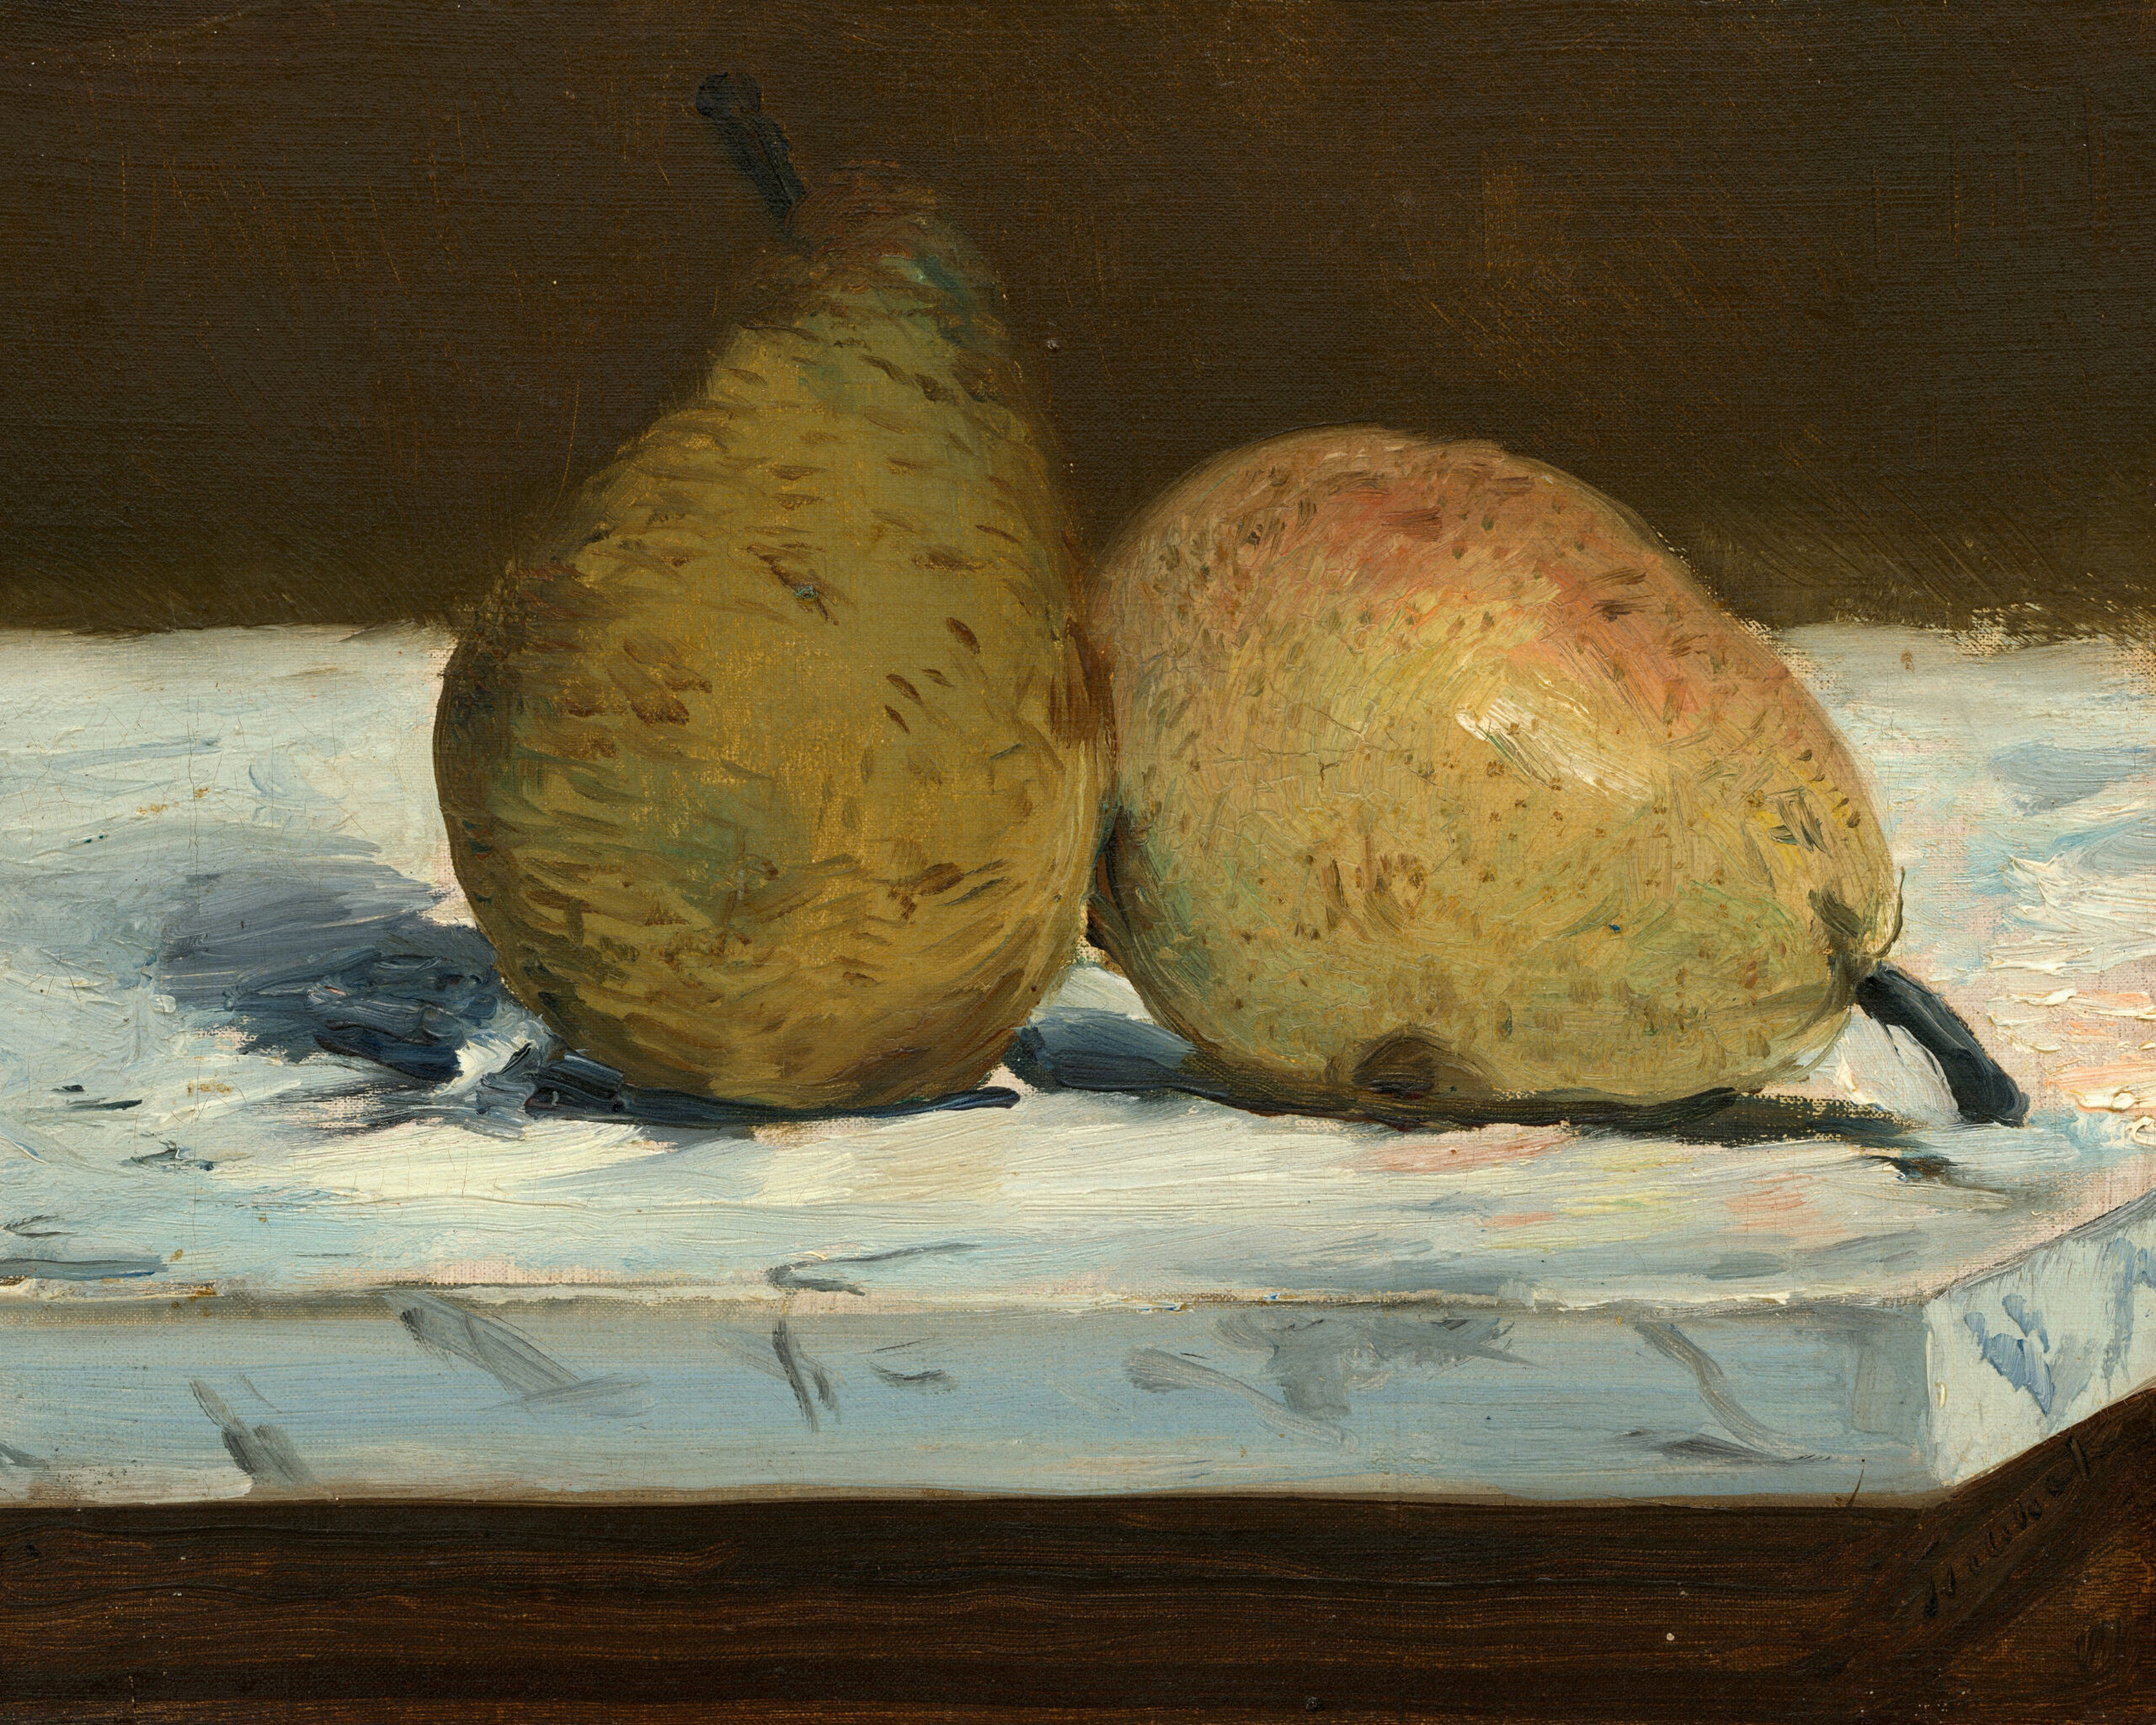 Painting of two pears